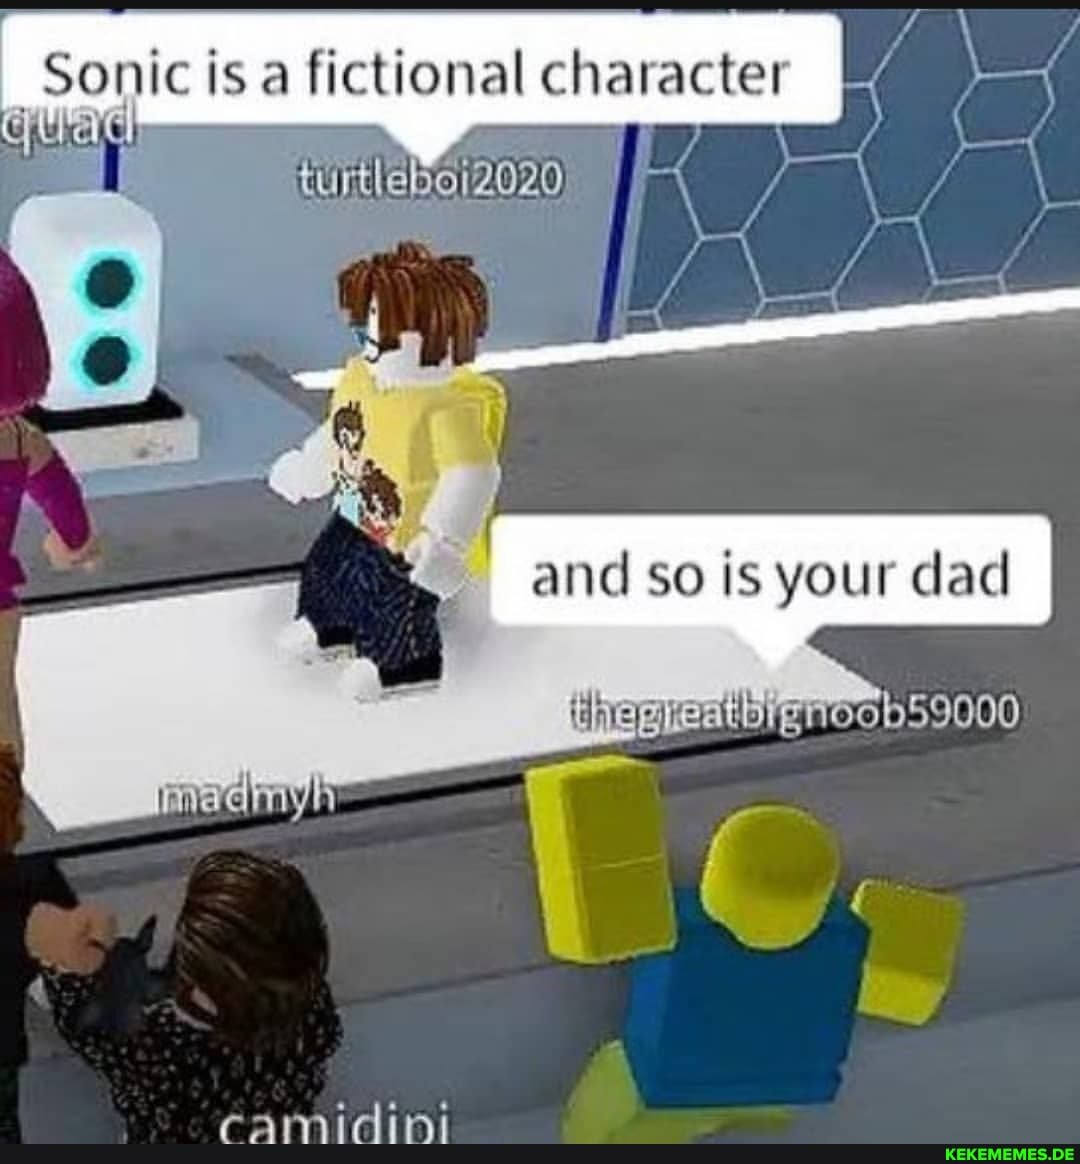 Sonic fictional character and so is your dad